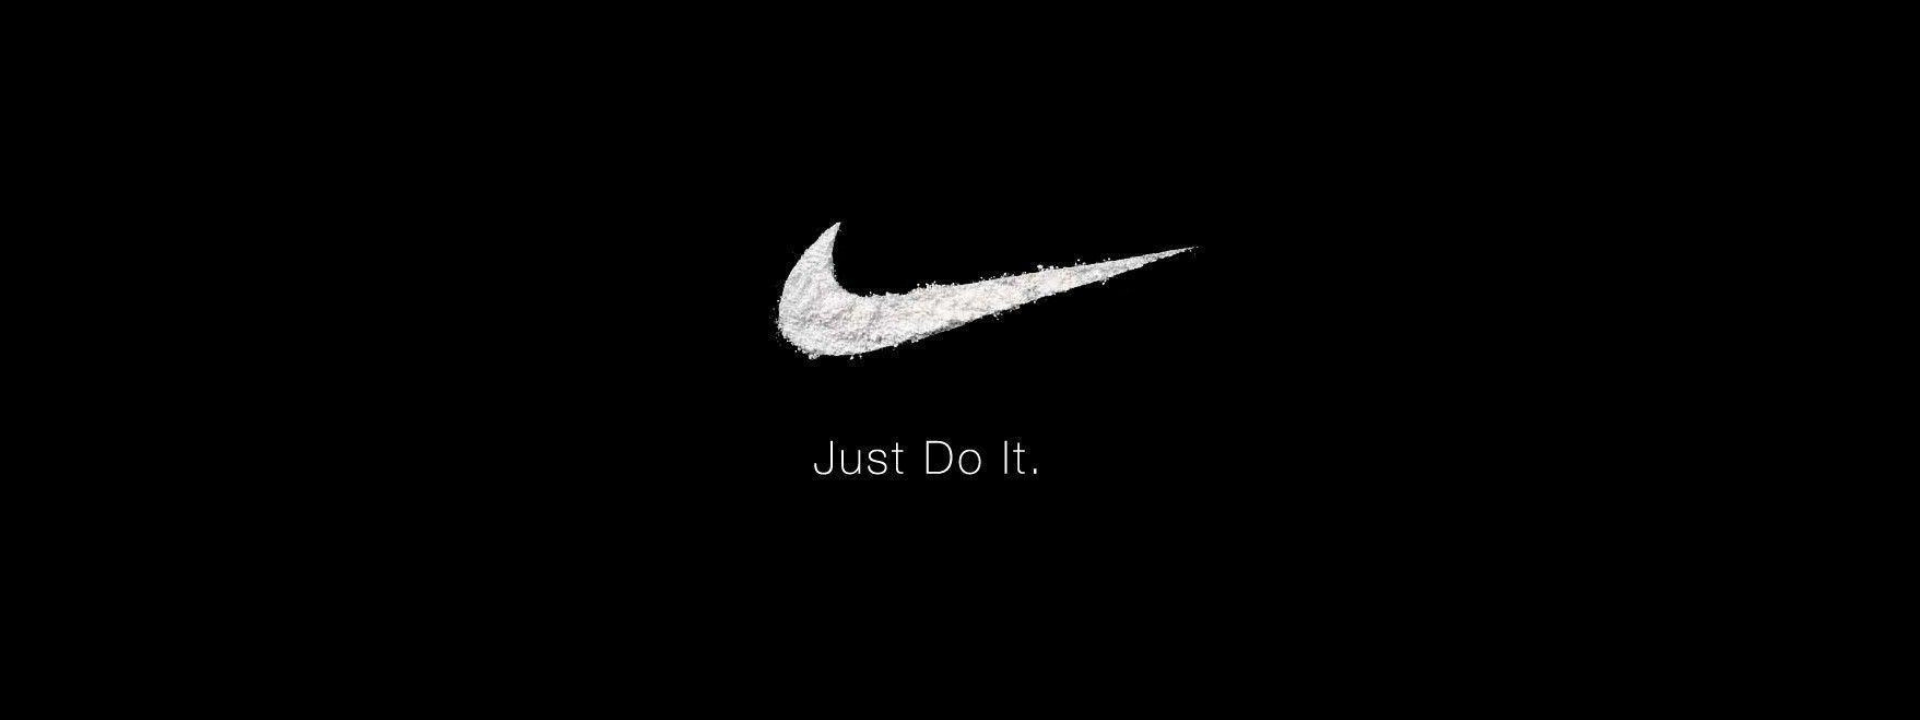 Motivate Concentration Expired LOGO UNRAVEL: THE NIKE SWOOSH – Mapemond Limited